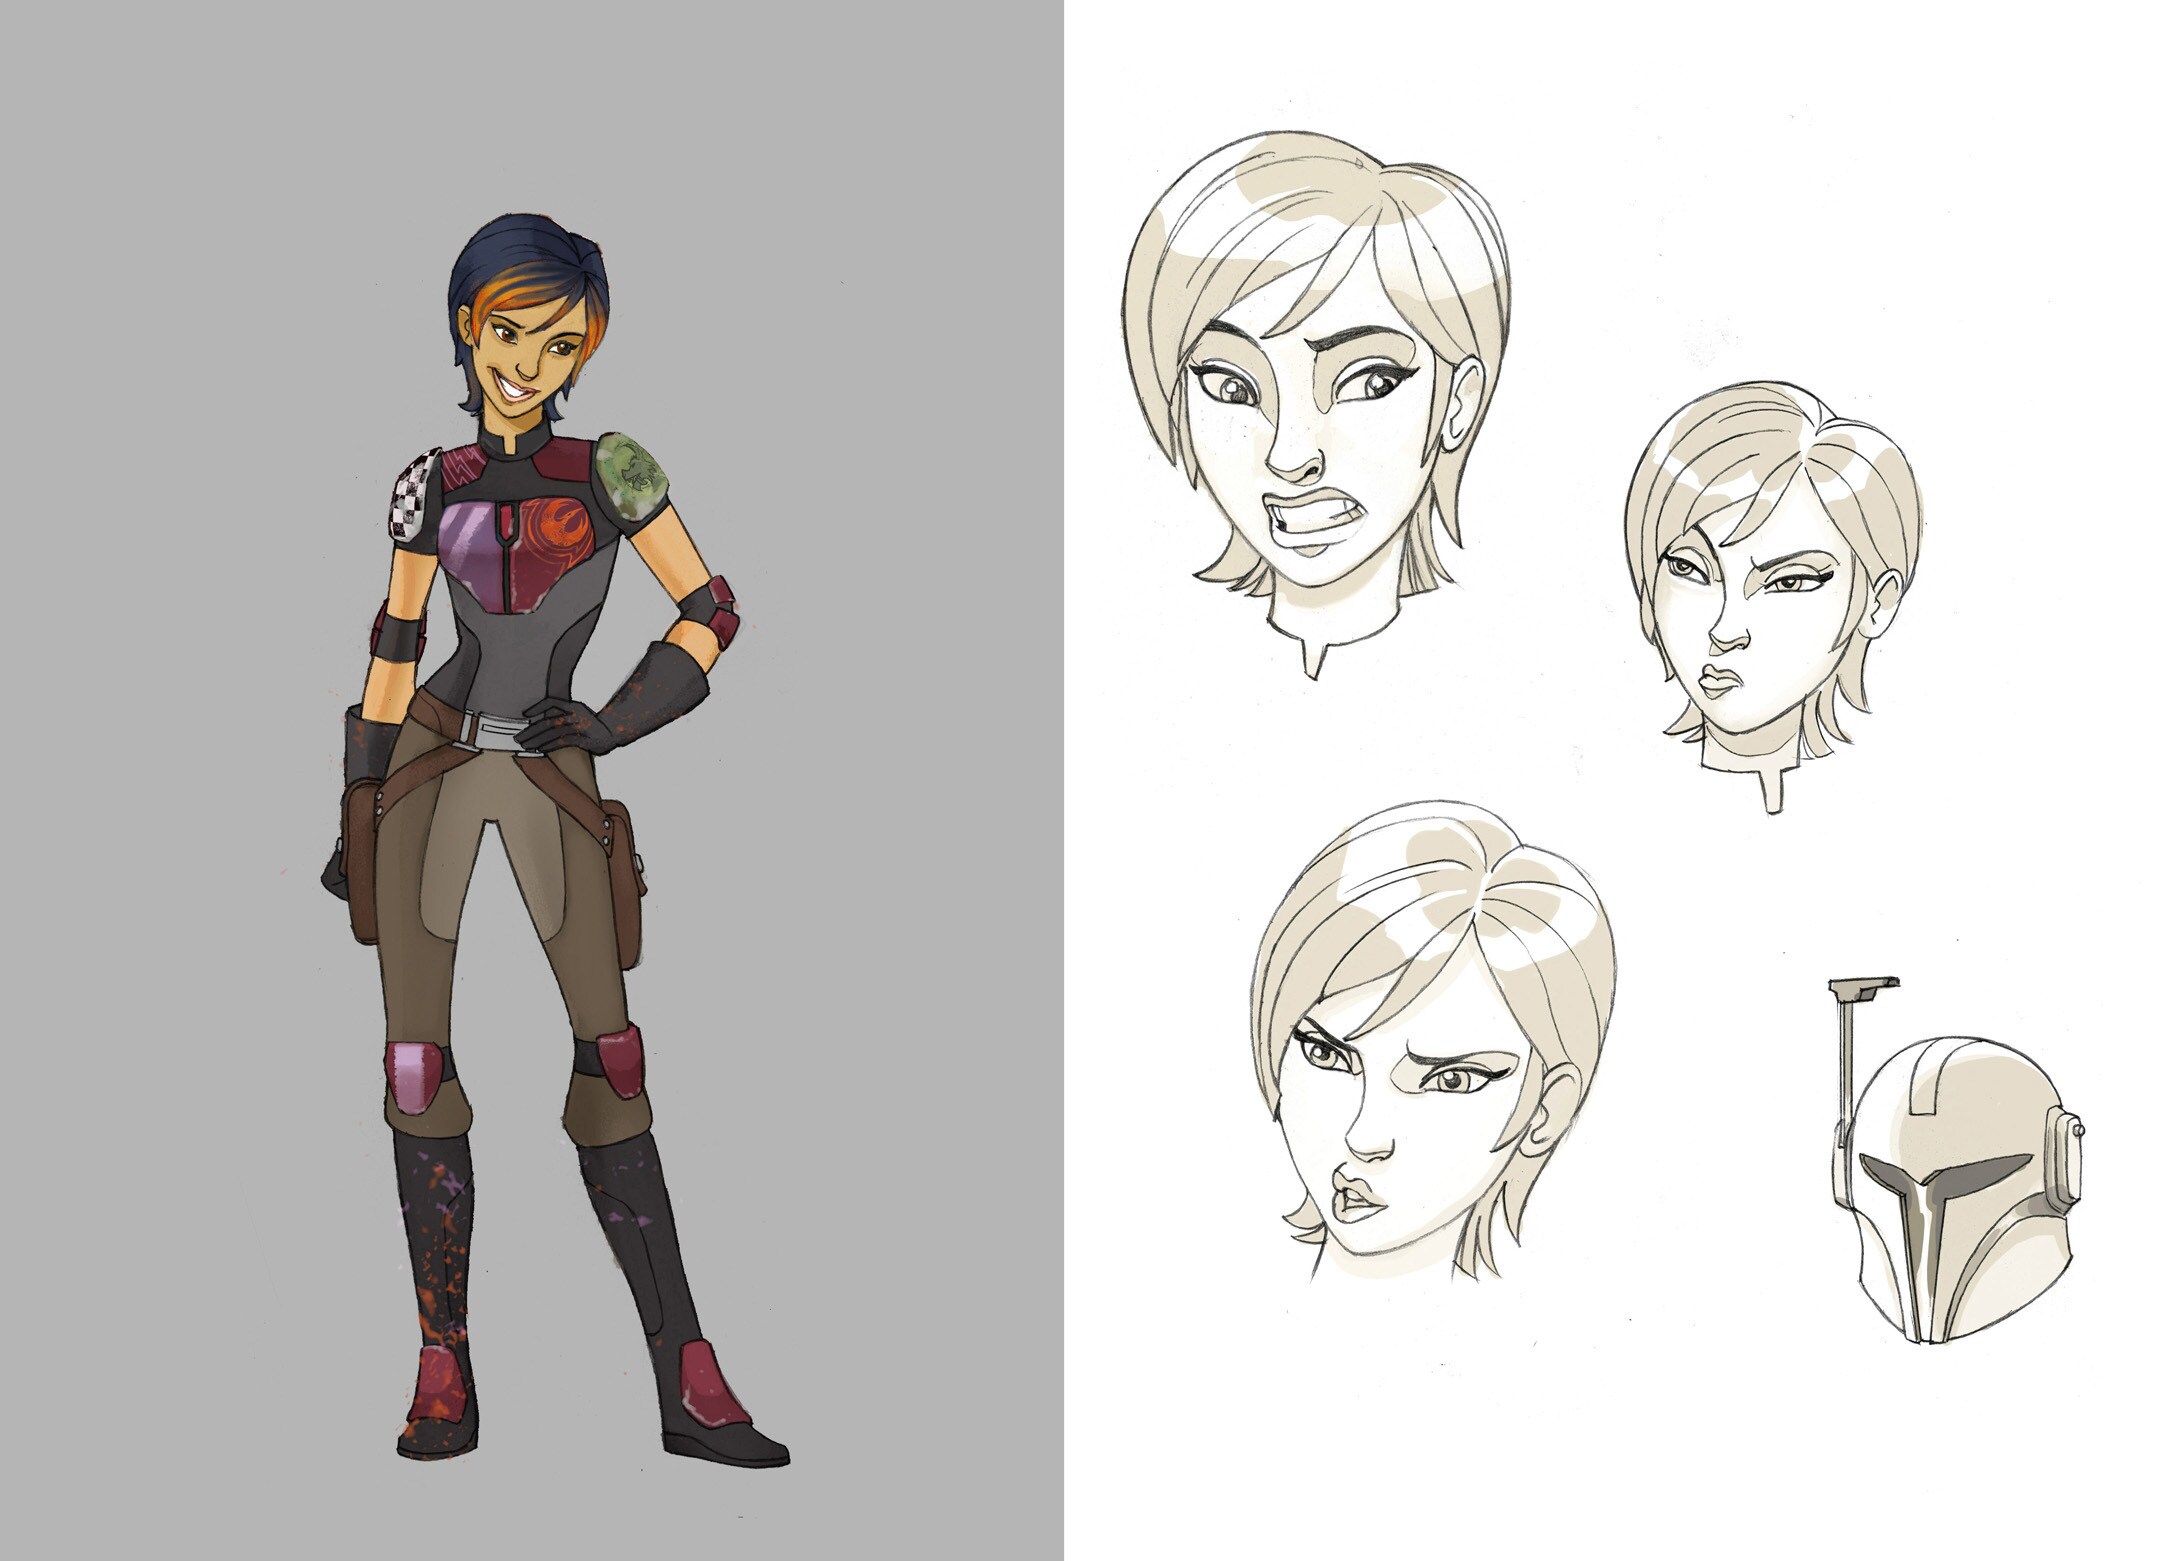 Sabine Wren full character illustration and facial expression designs.